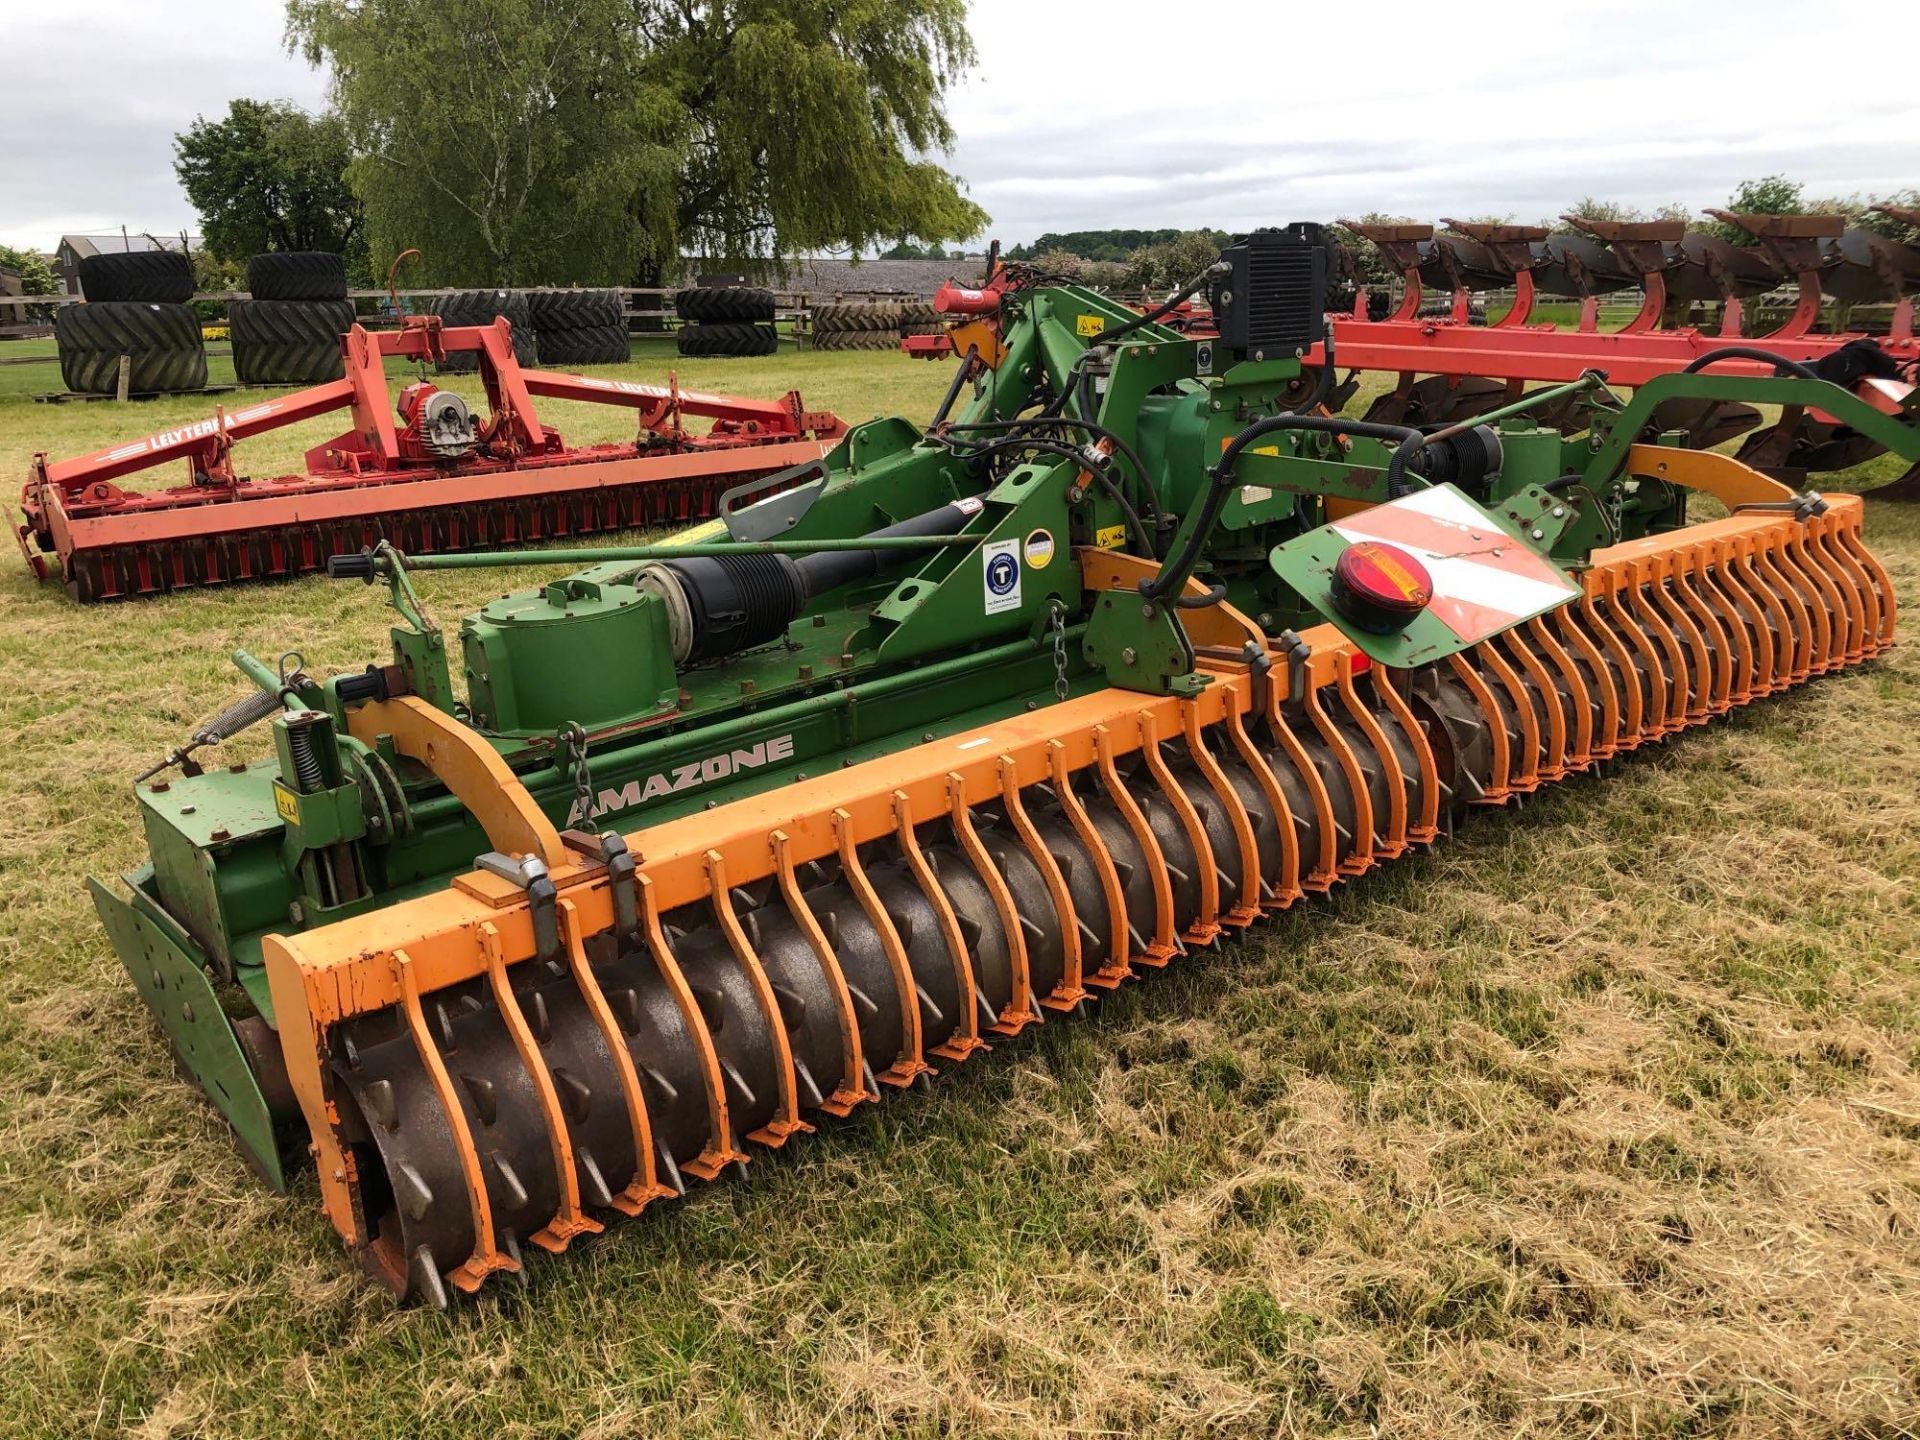 2014 Amazone KG5001-2 power harrow with rear tooth packer. Serial No: KG00062299 - Image 3 of 4